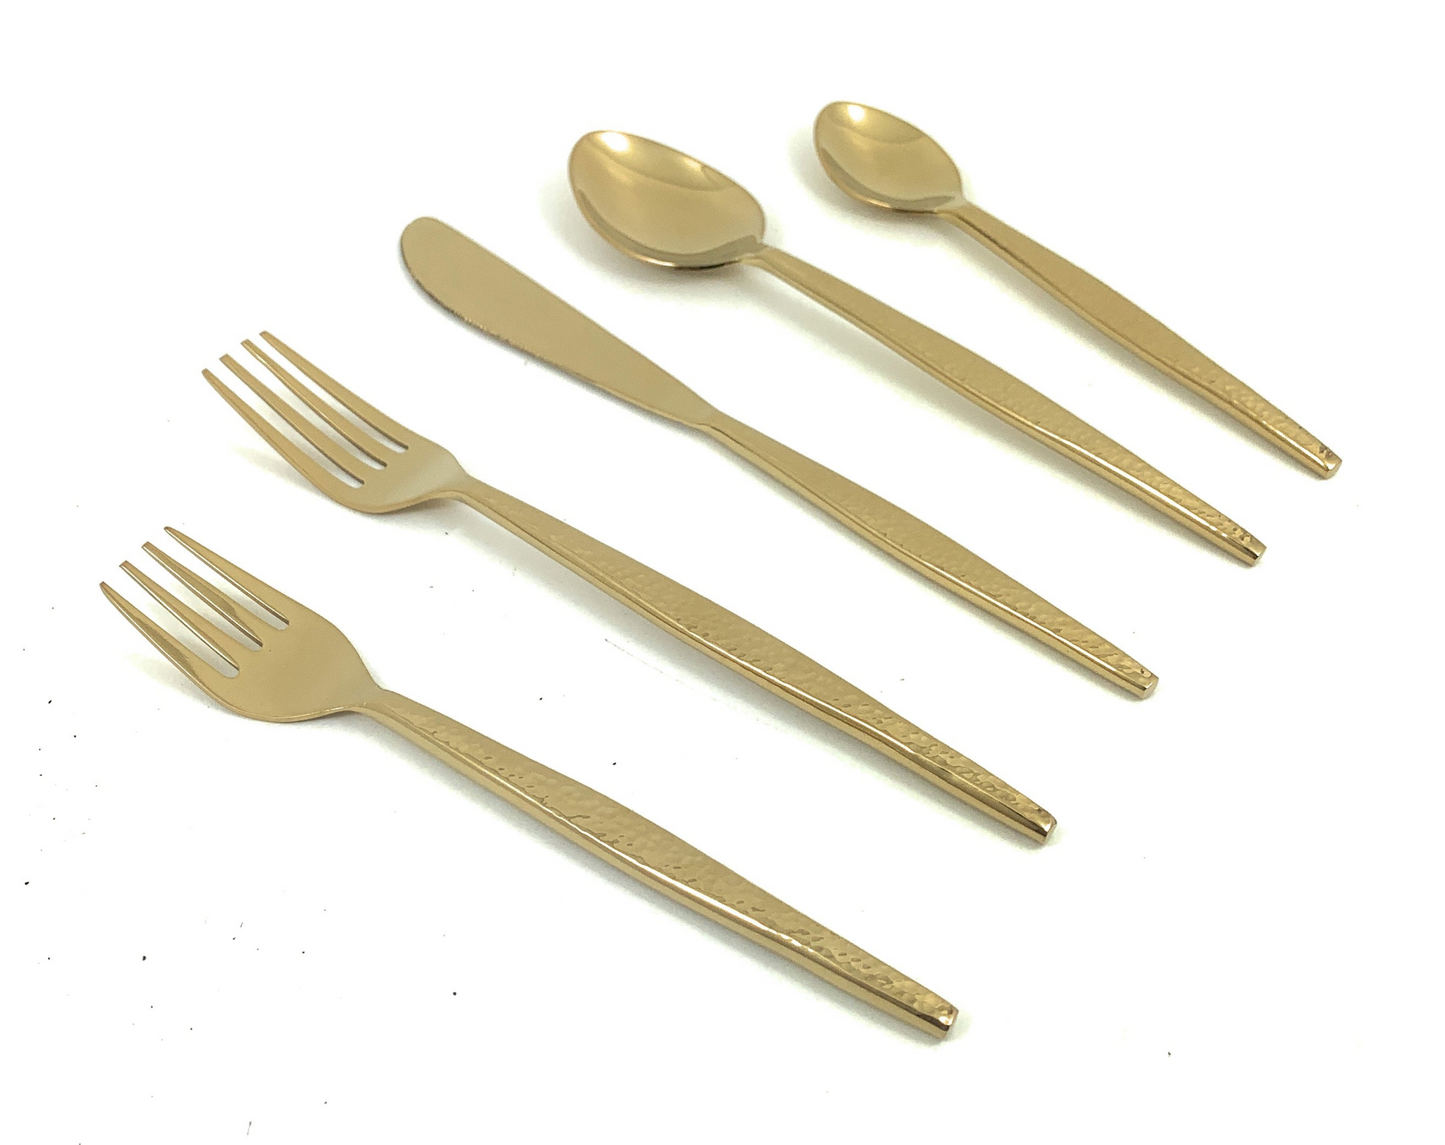 Vibhsa 20 Piece Gold Flatware Set, Service for 4-Hammered